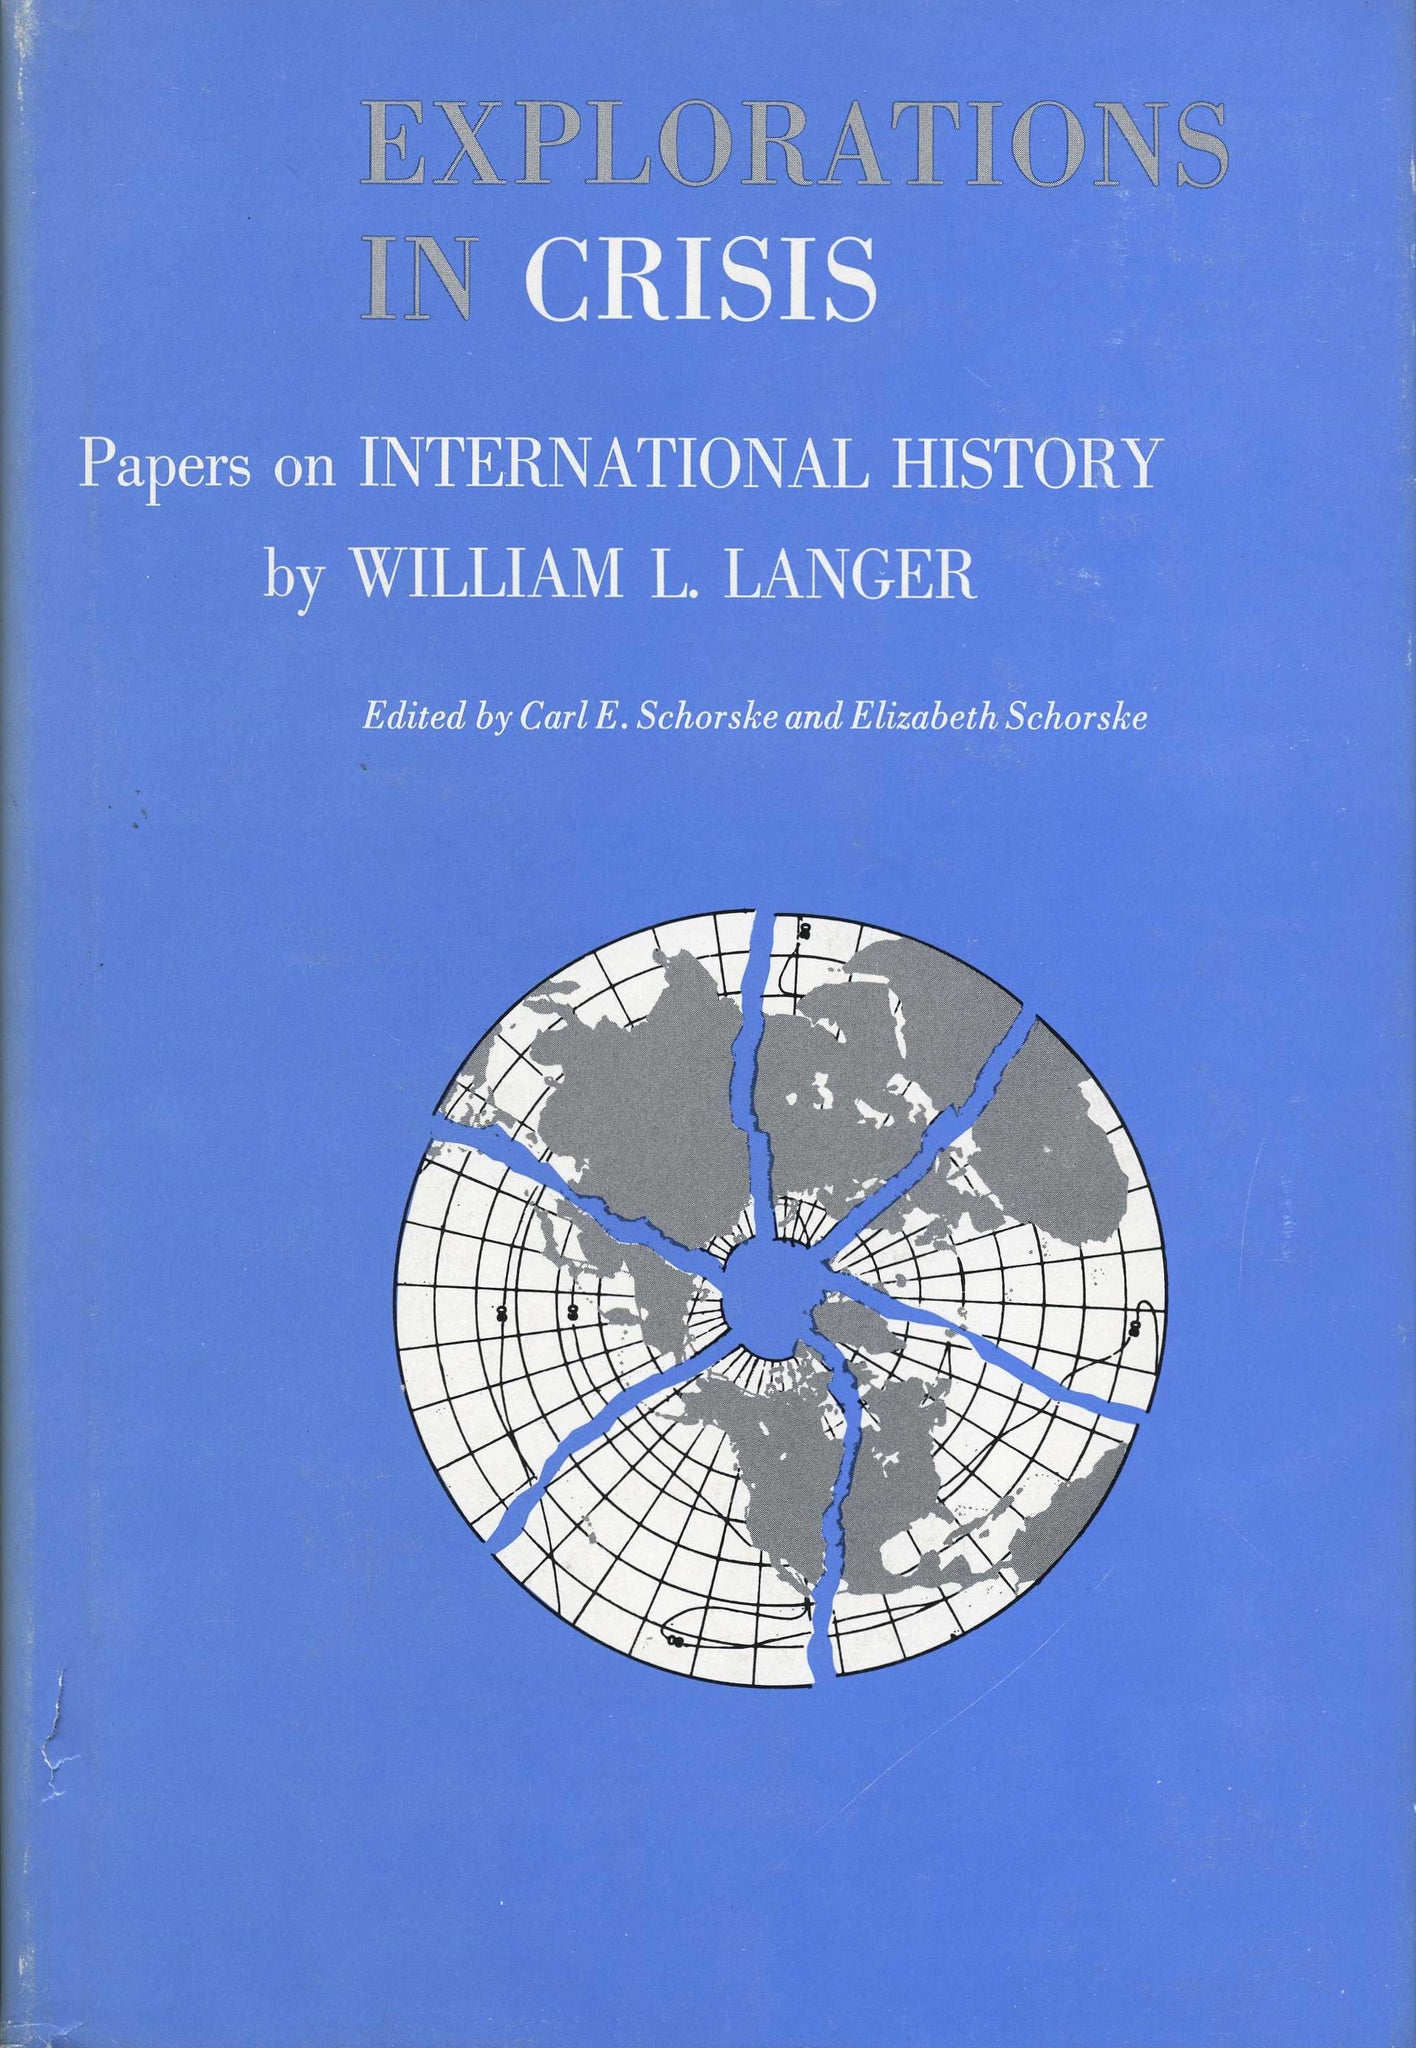 EXPLORATIONS IN CRISIS: Papers on International History